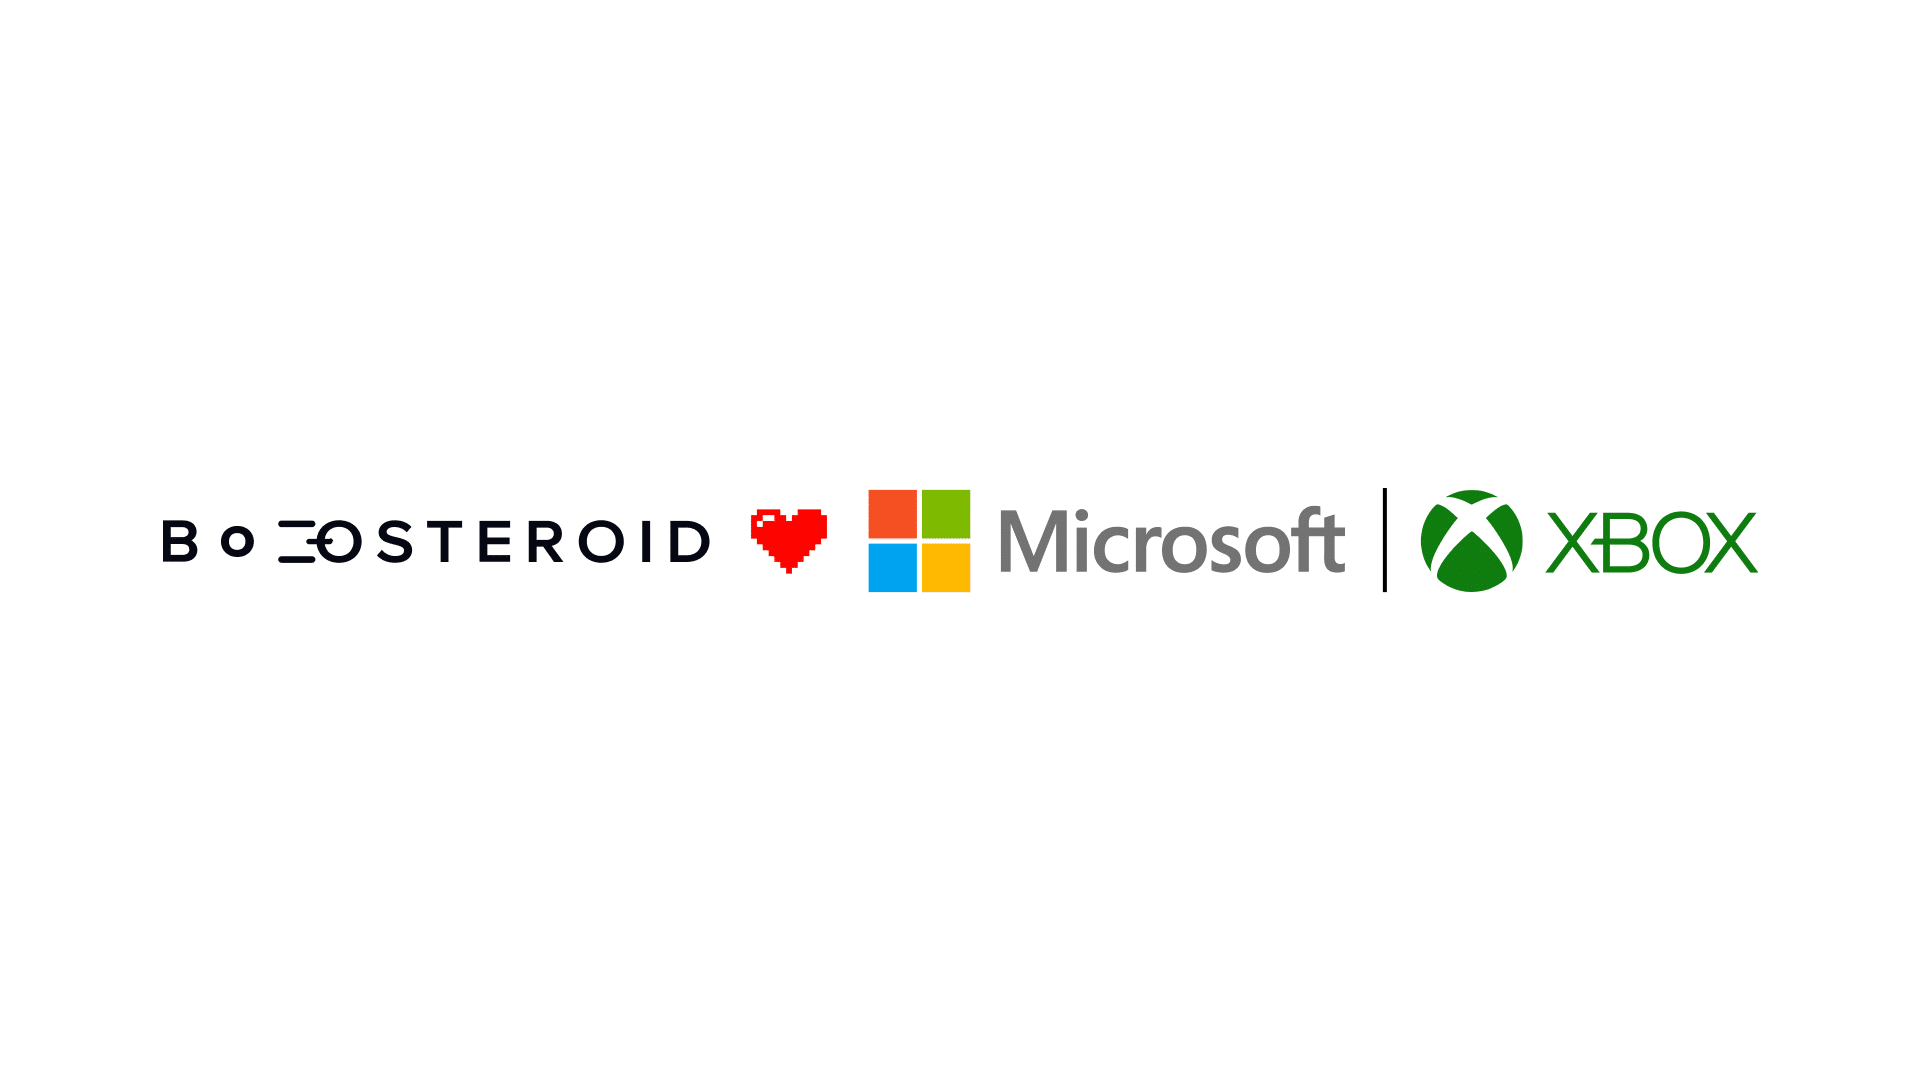 Boosteroid Hearts Microsoft and Xbox